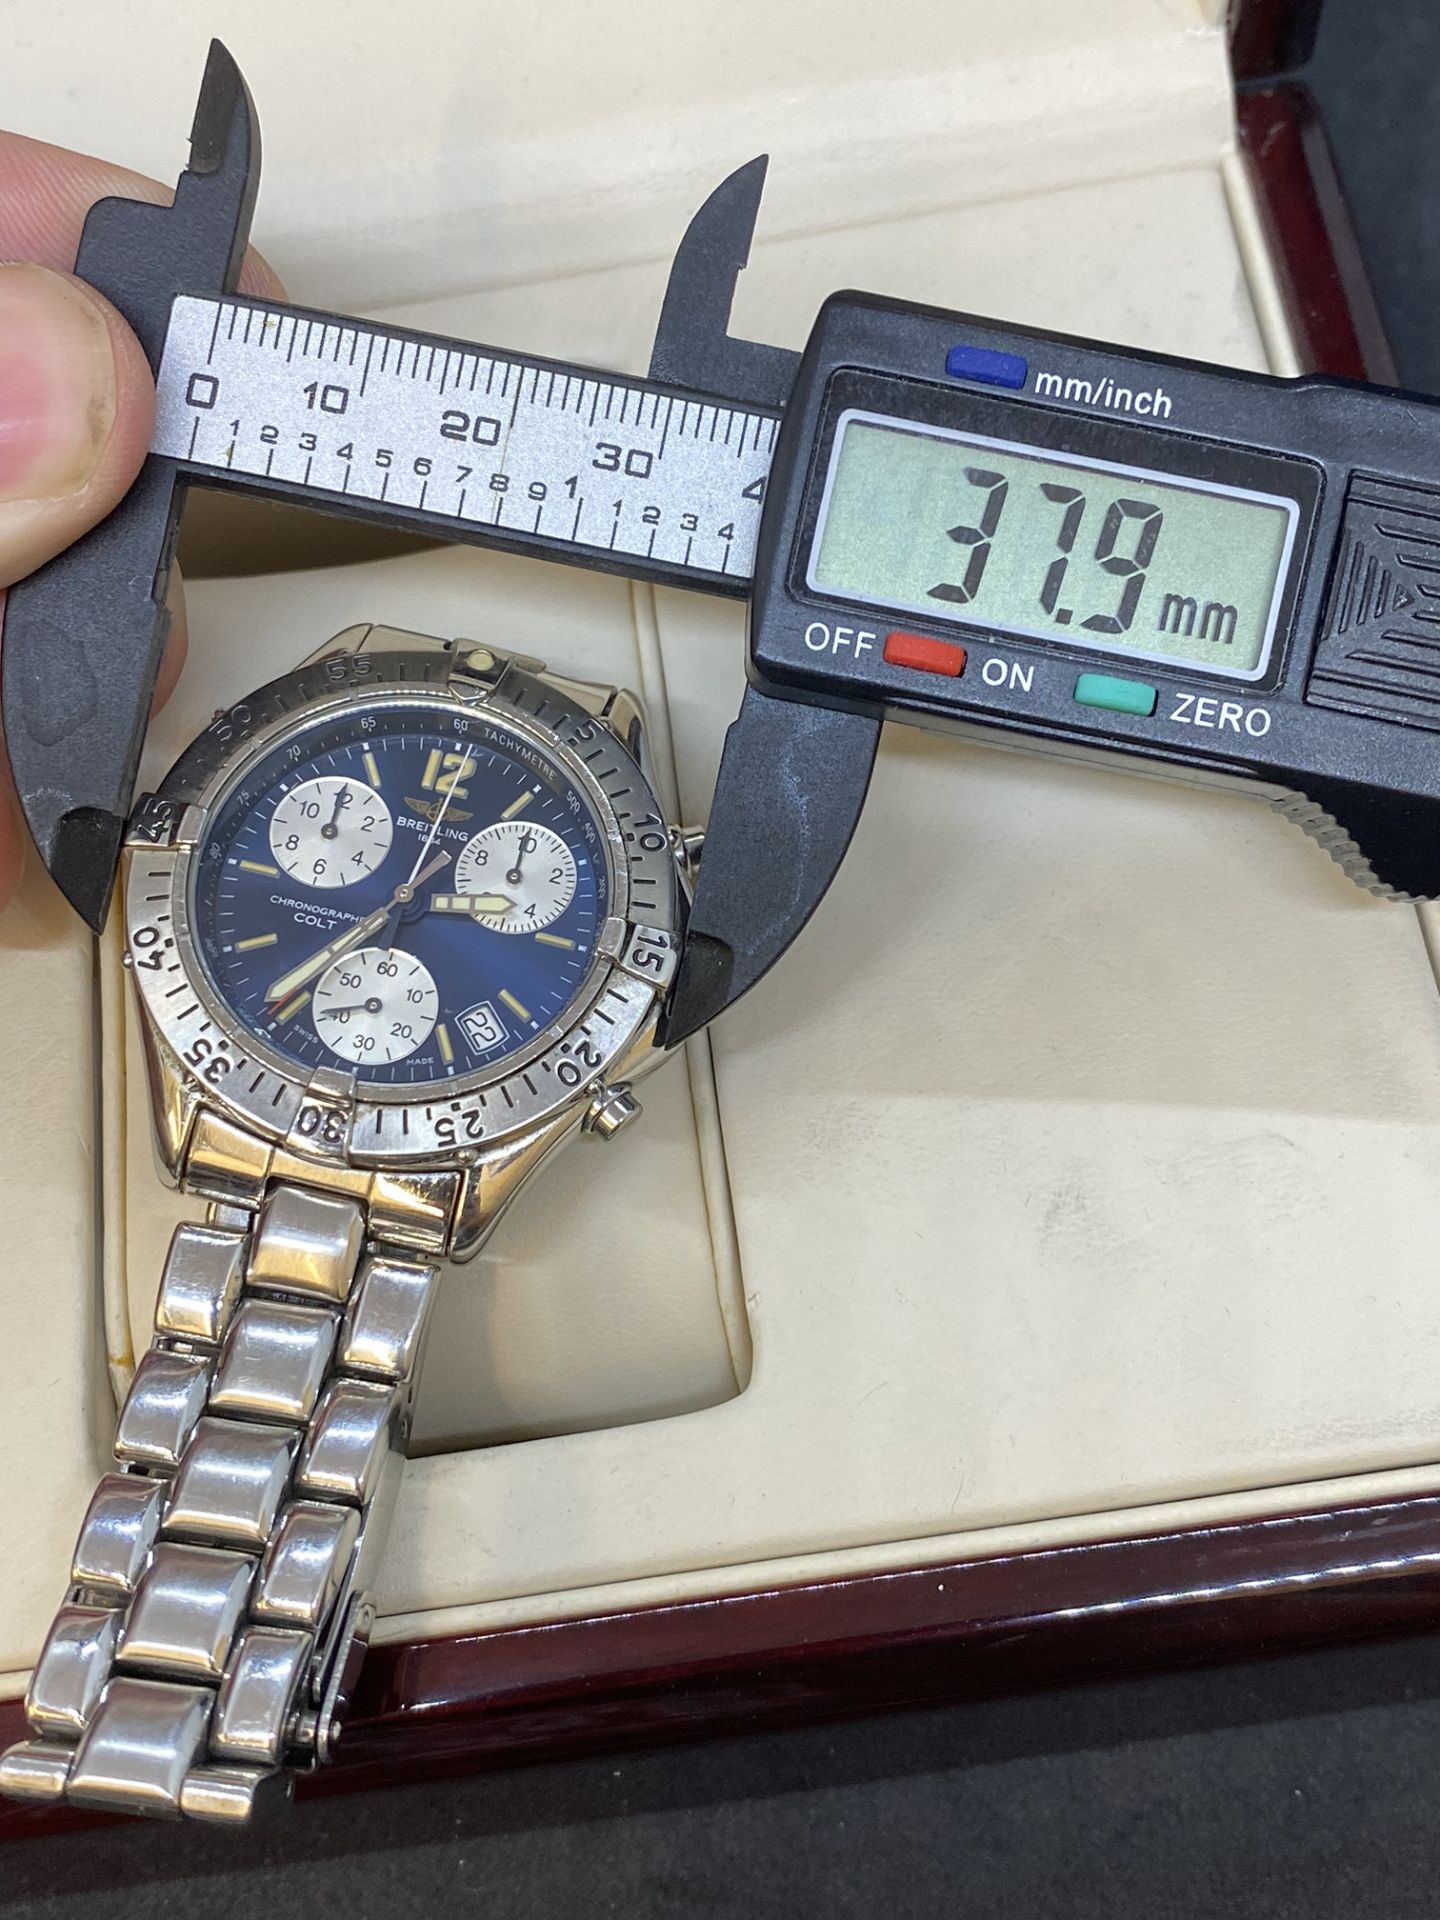 BREITLING CHRONOGRAPH STAINLESS STEEL WATCH - Image 13 of 13